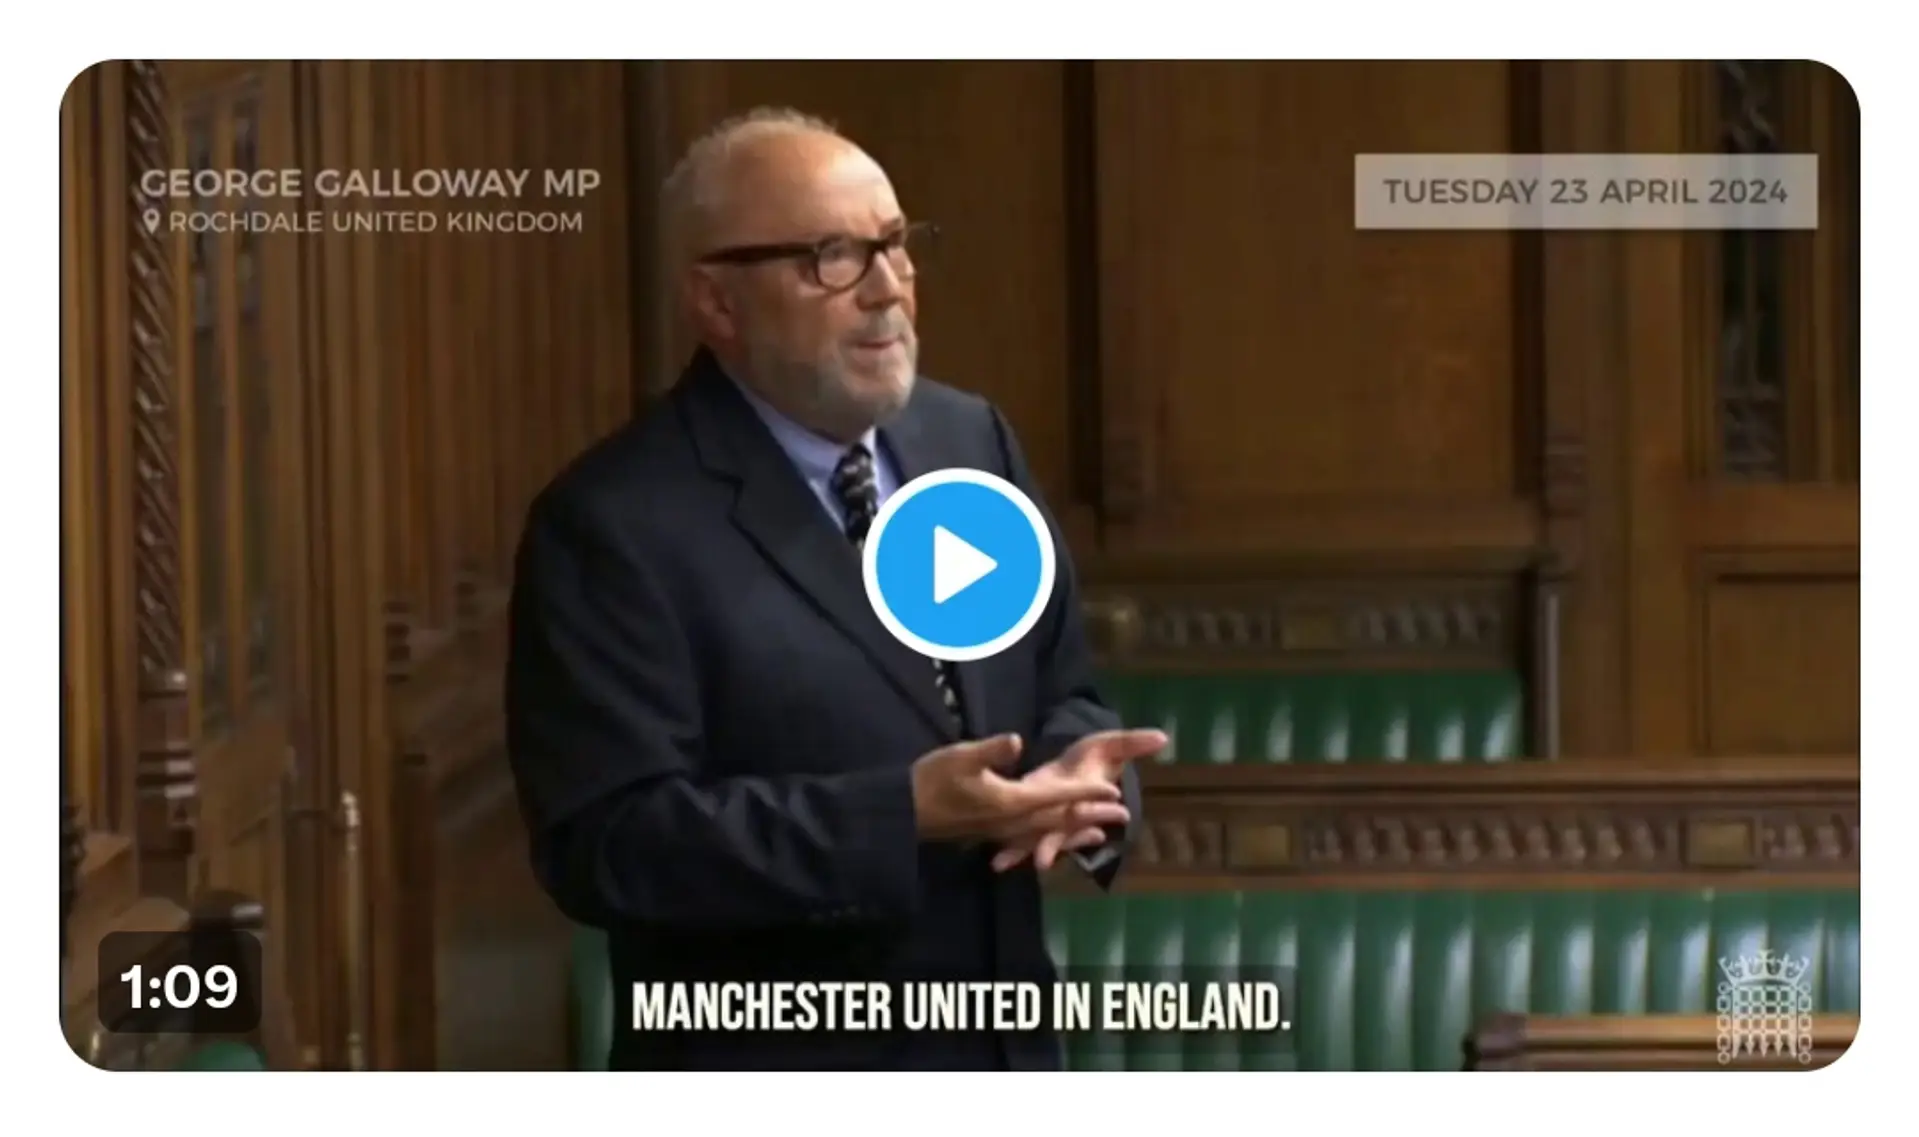 "The Glazers must go" cries Rochdale MP  @georgegalloway in a rallying debate on football in Parliament. A vital step to